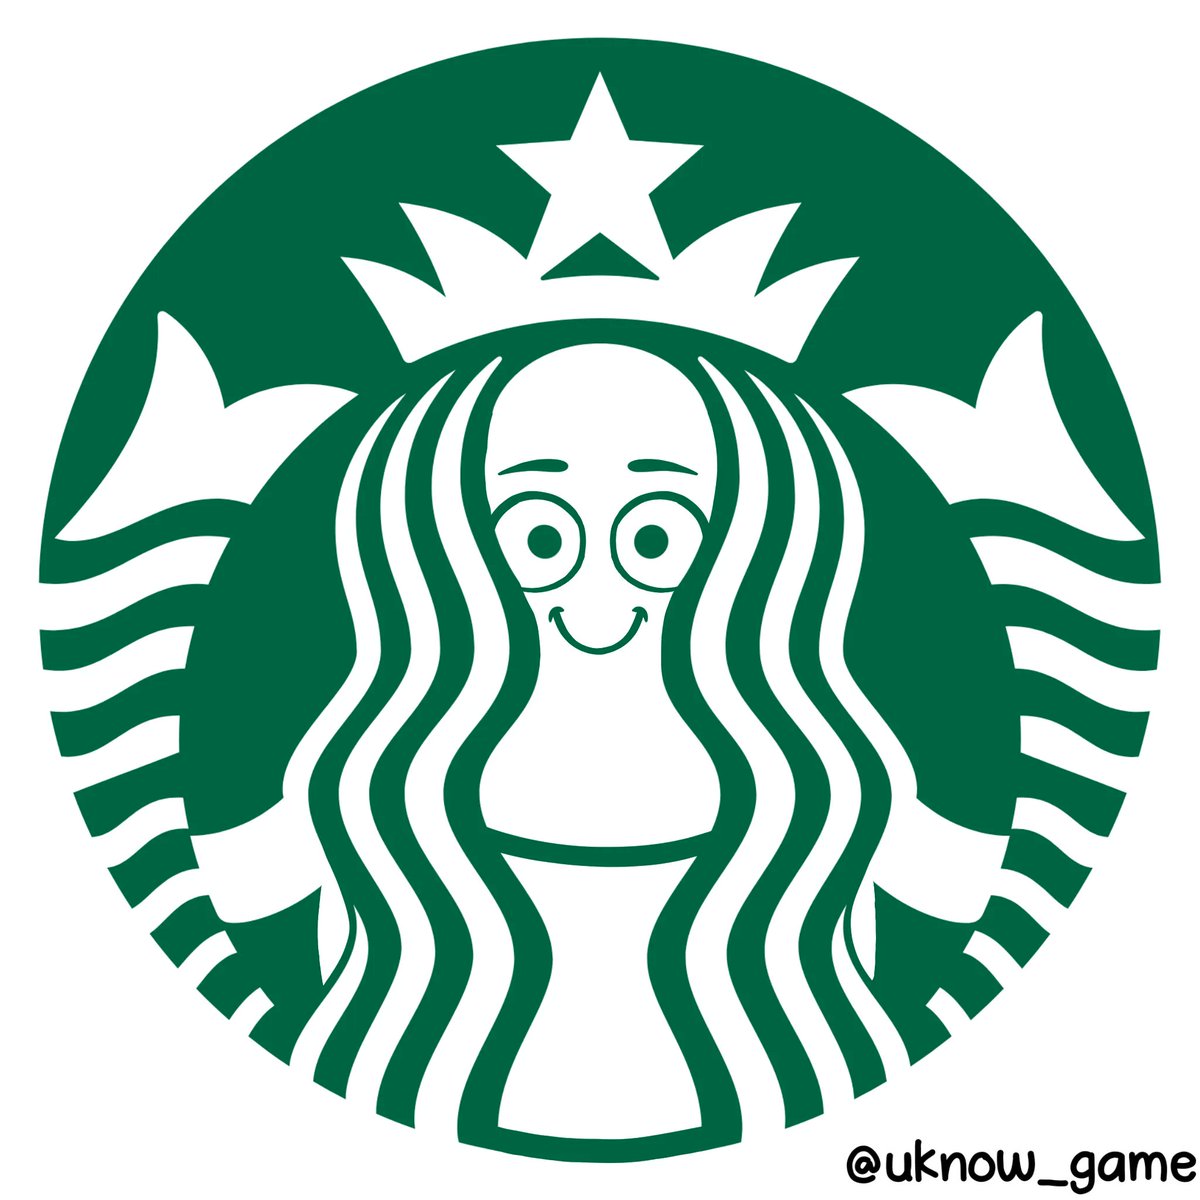 The Starbucks logo is a siren, a mythical creature that lures sailors to their doom. 🌊 #funfacts #brands